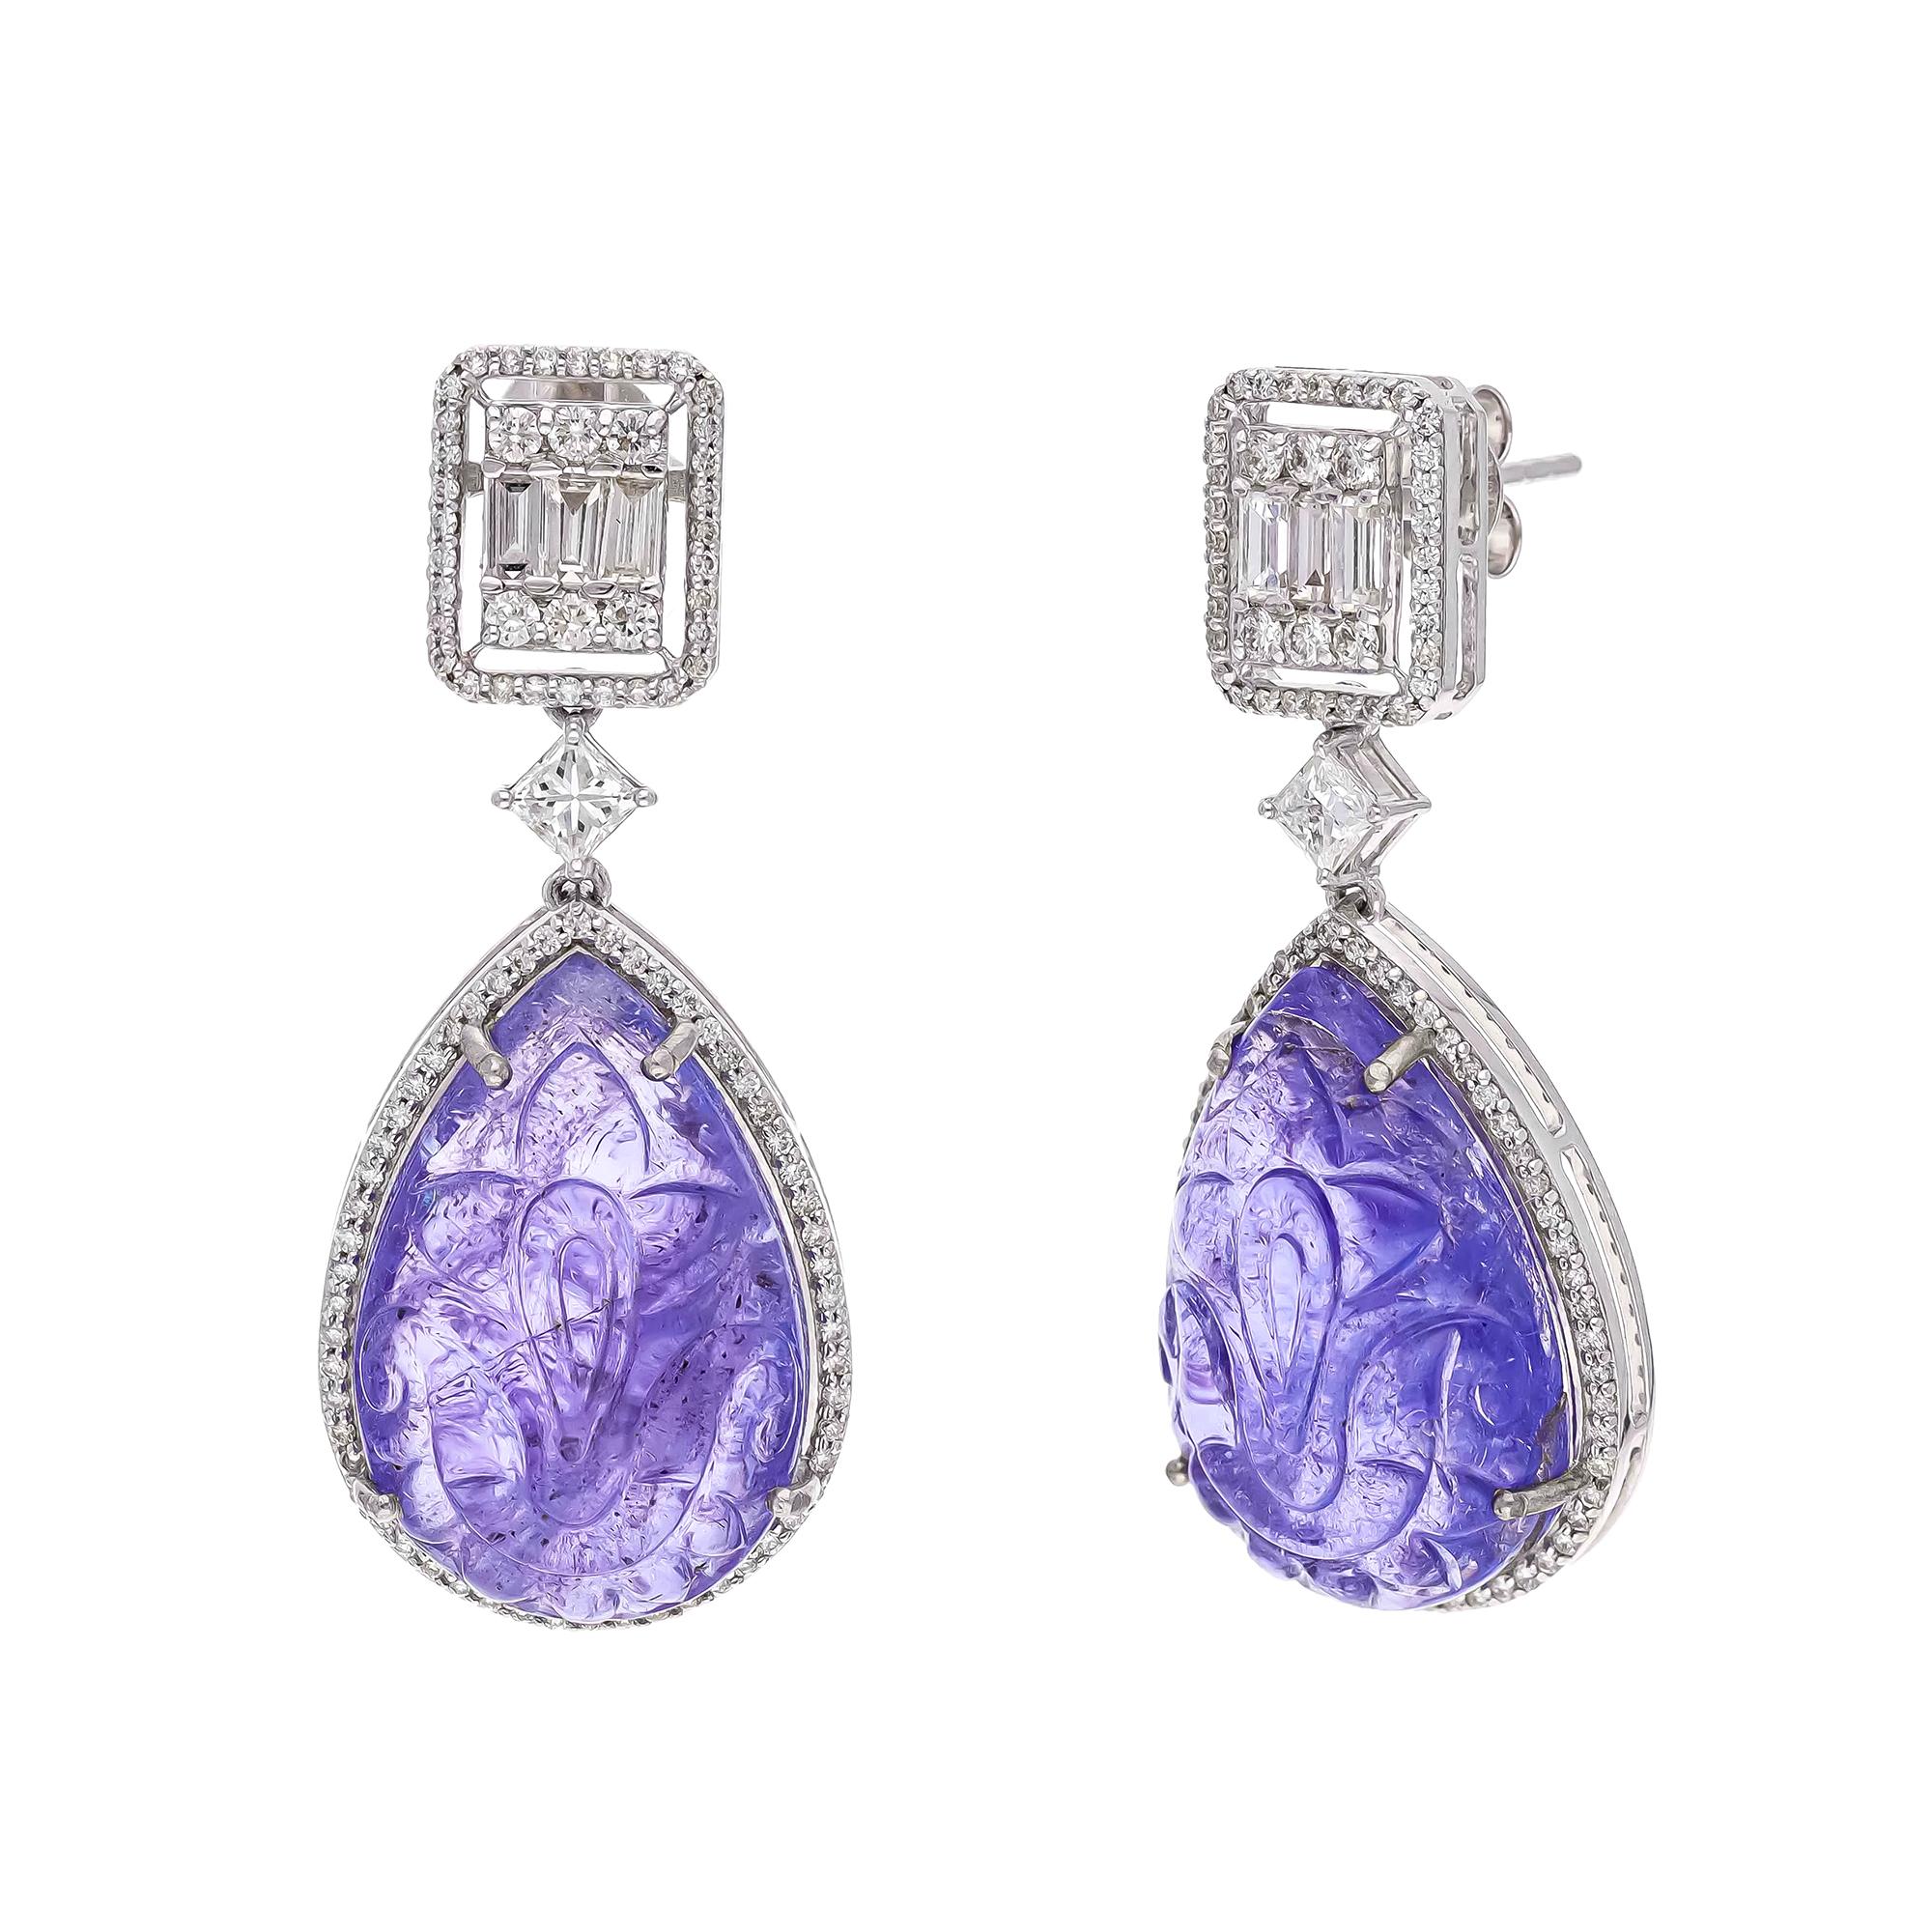 Natural Tanzenite Earring with 1.86 Cts Diamond & Tanzenite 35.40 Cts in 18k In New Condition For Sale In New York, NY